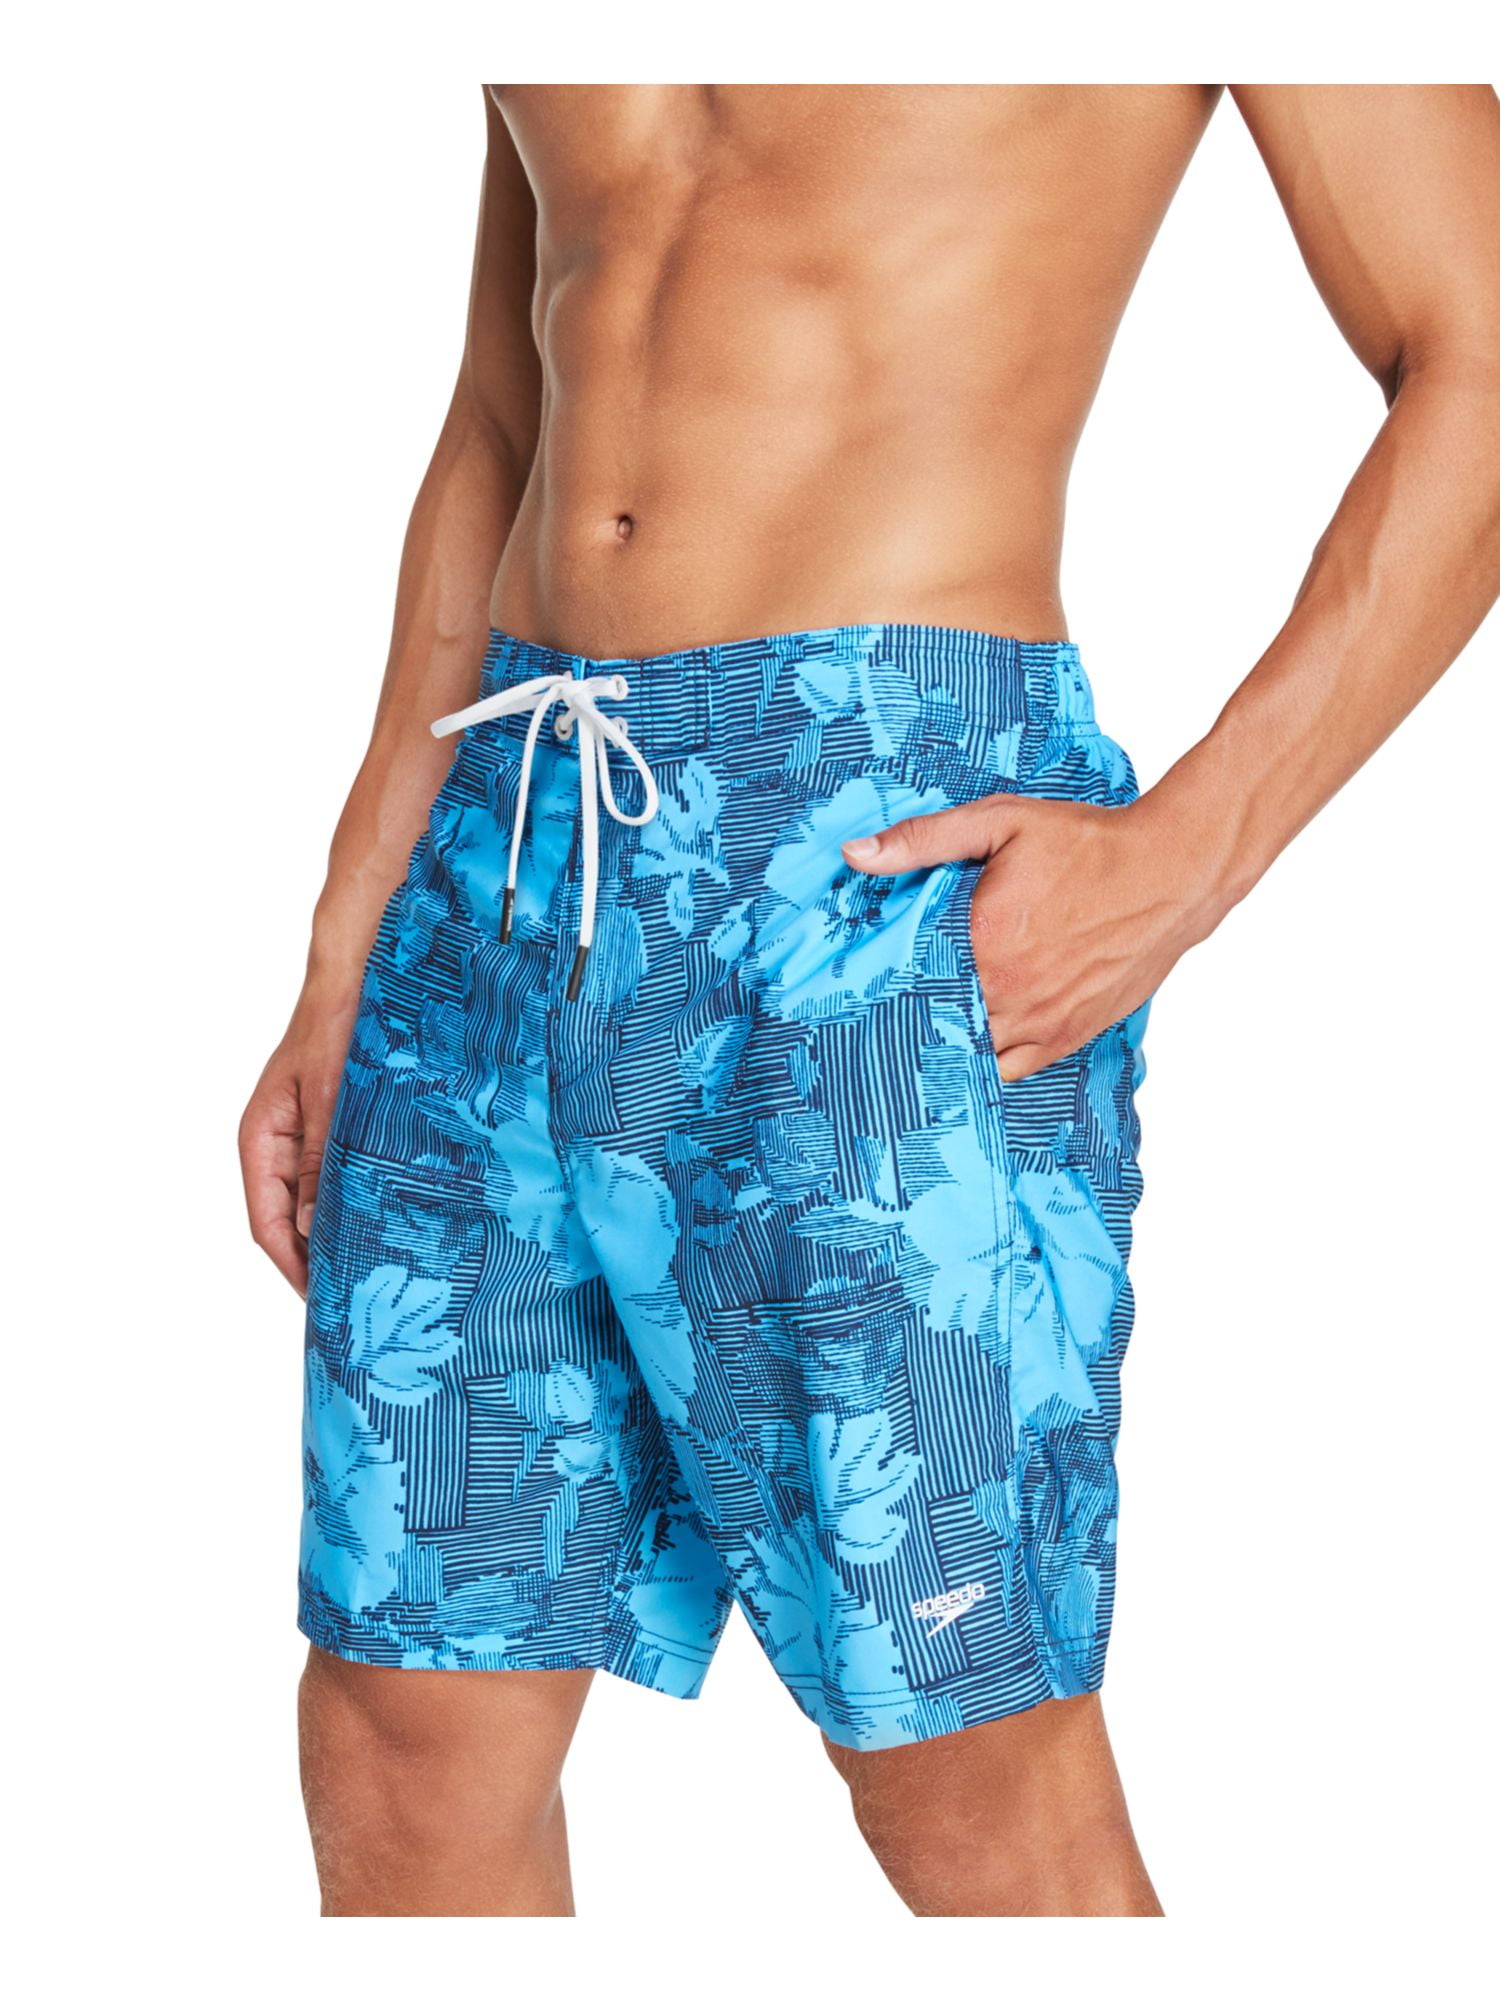 Details about   MENS BLACK SPEEDO SOLID LEISURE SWIM SWIMMING SHORTS TRUNKS NEW 